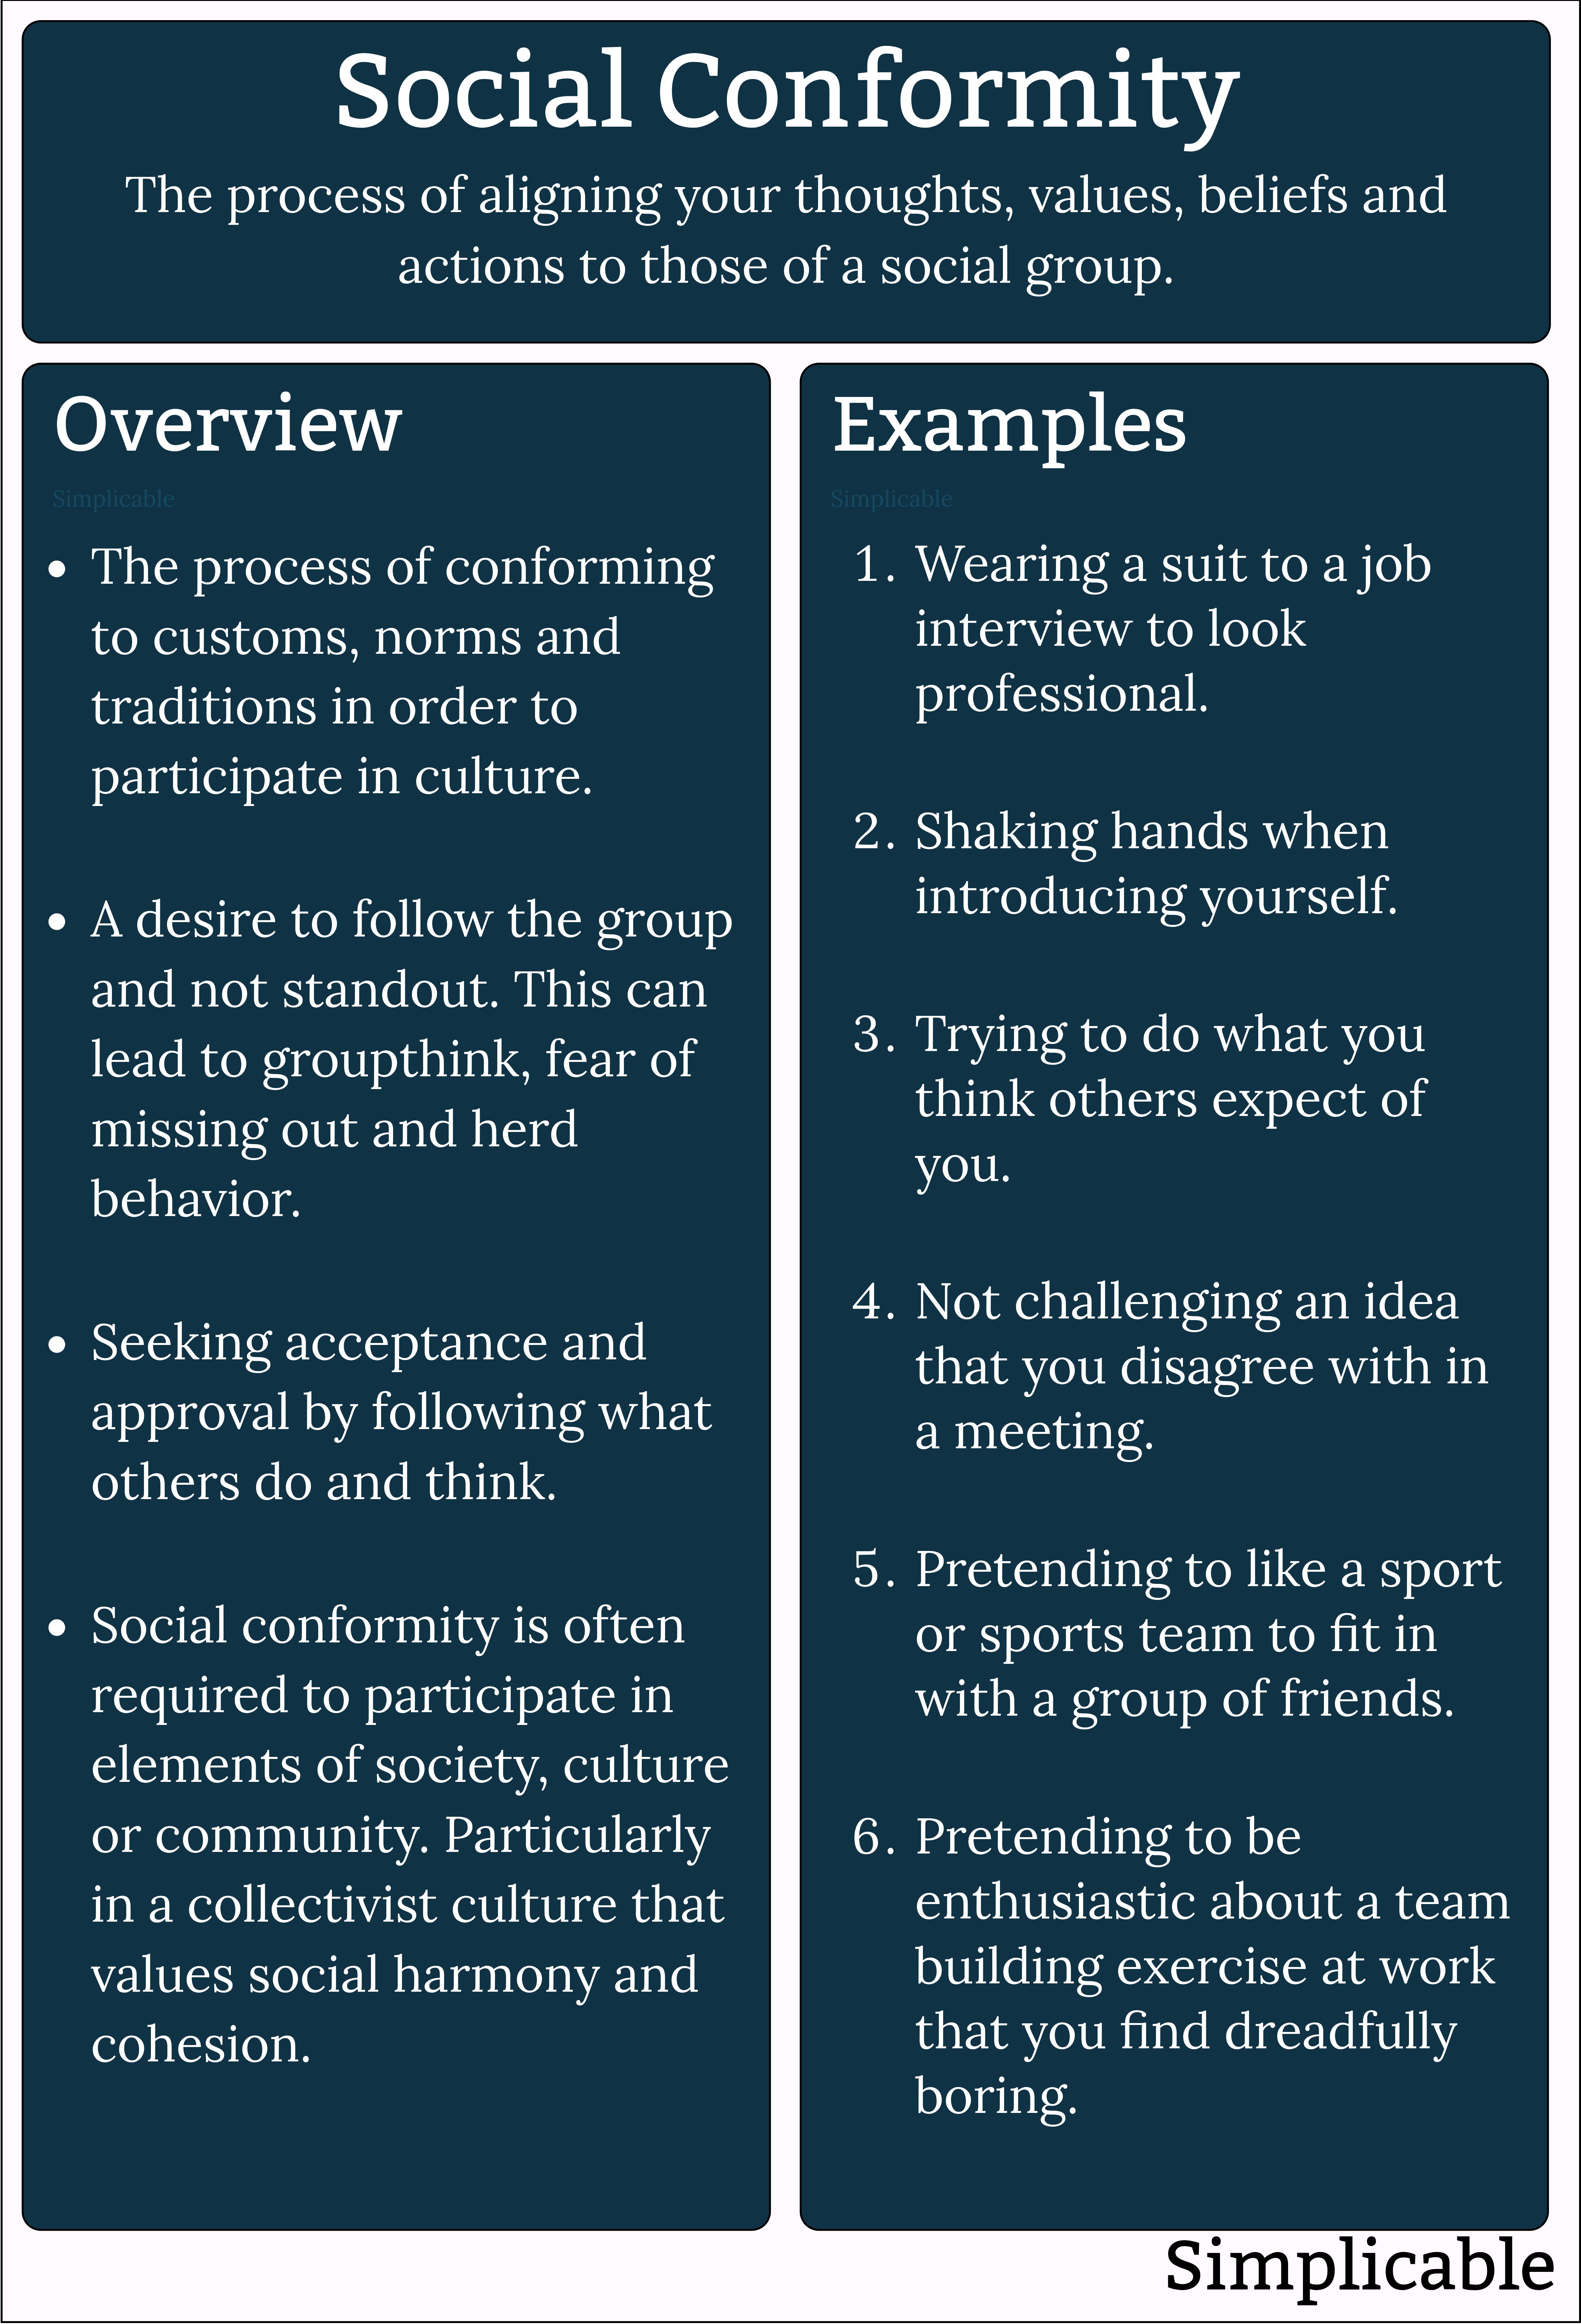 social conformity overview and examples